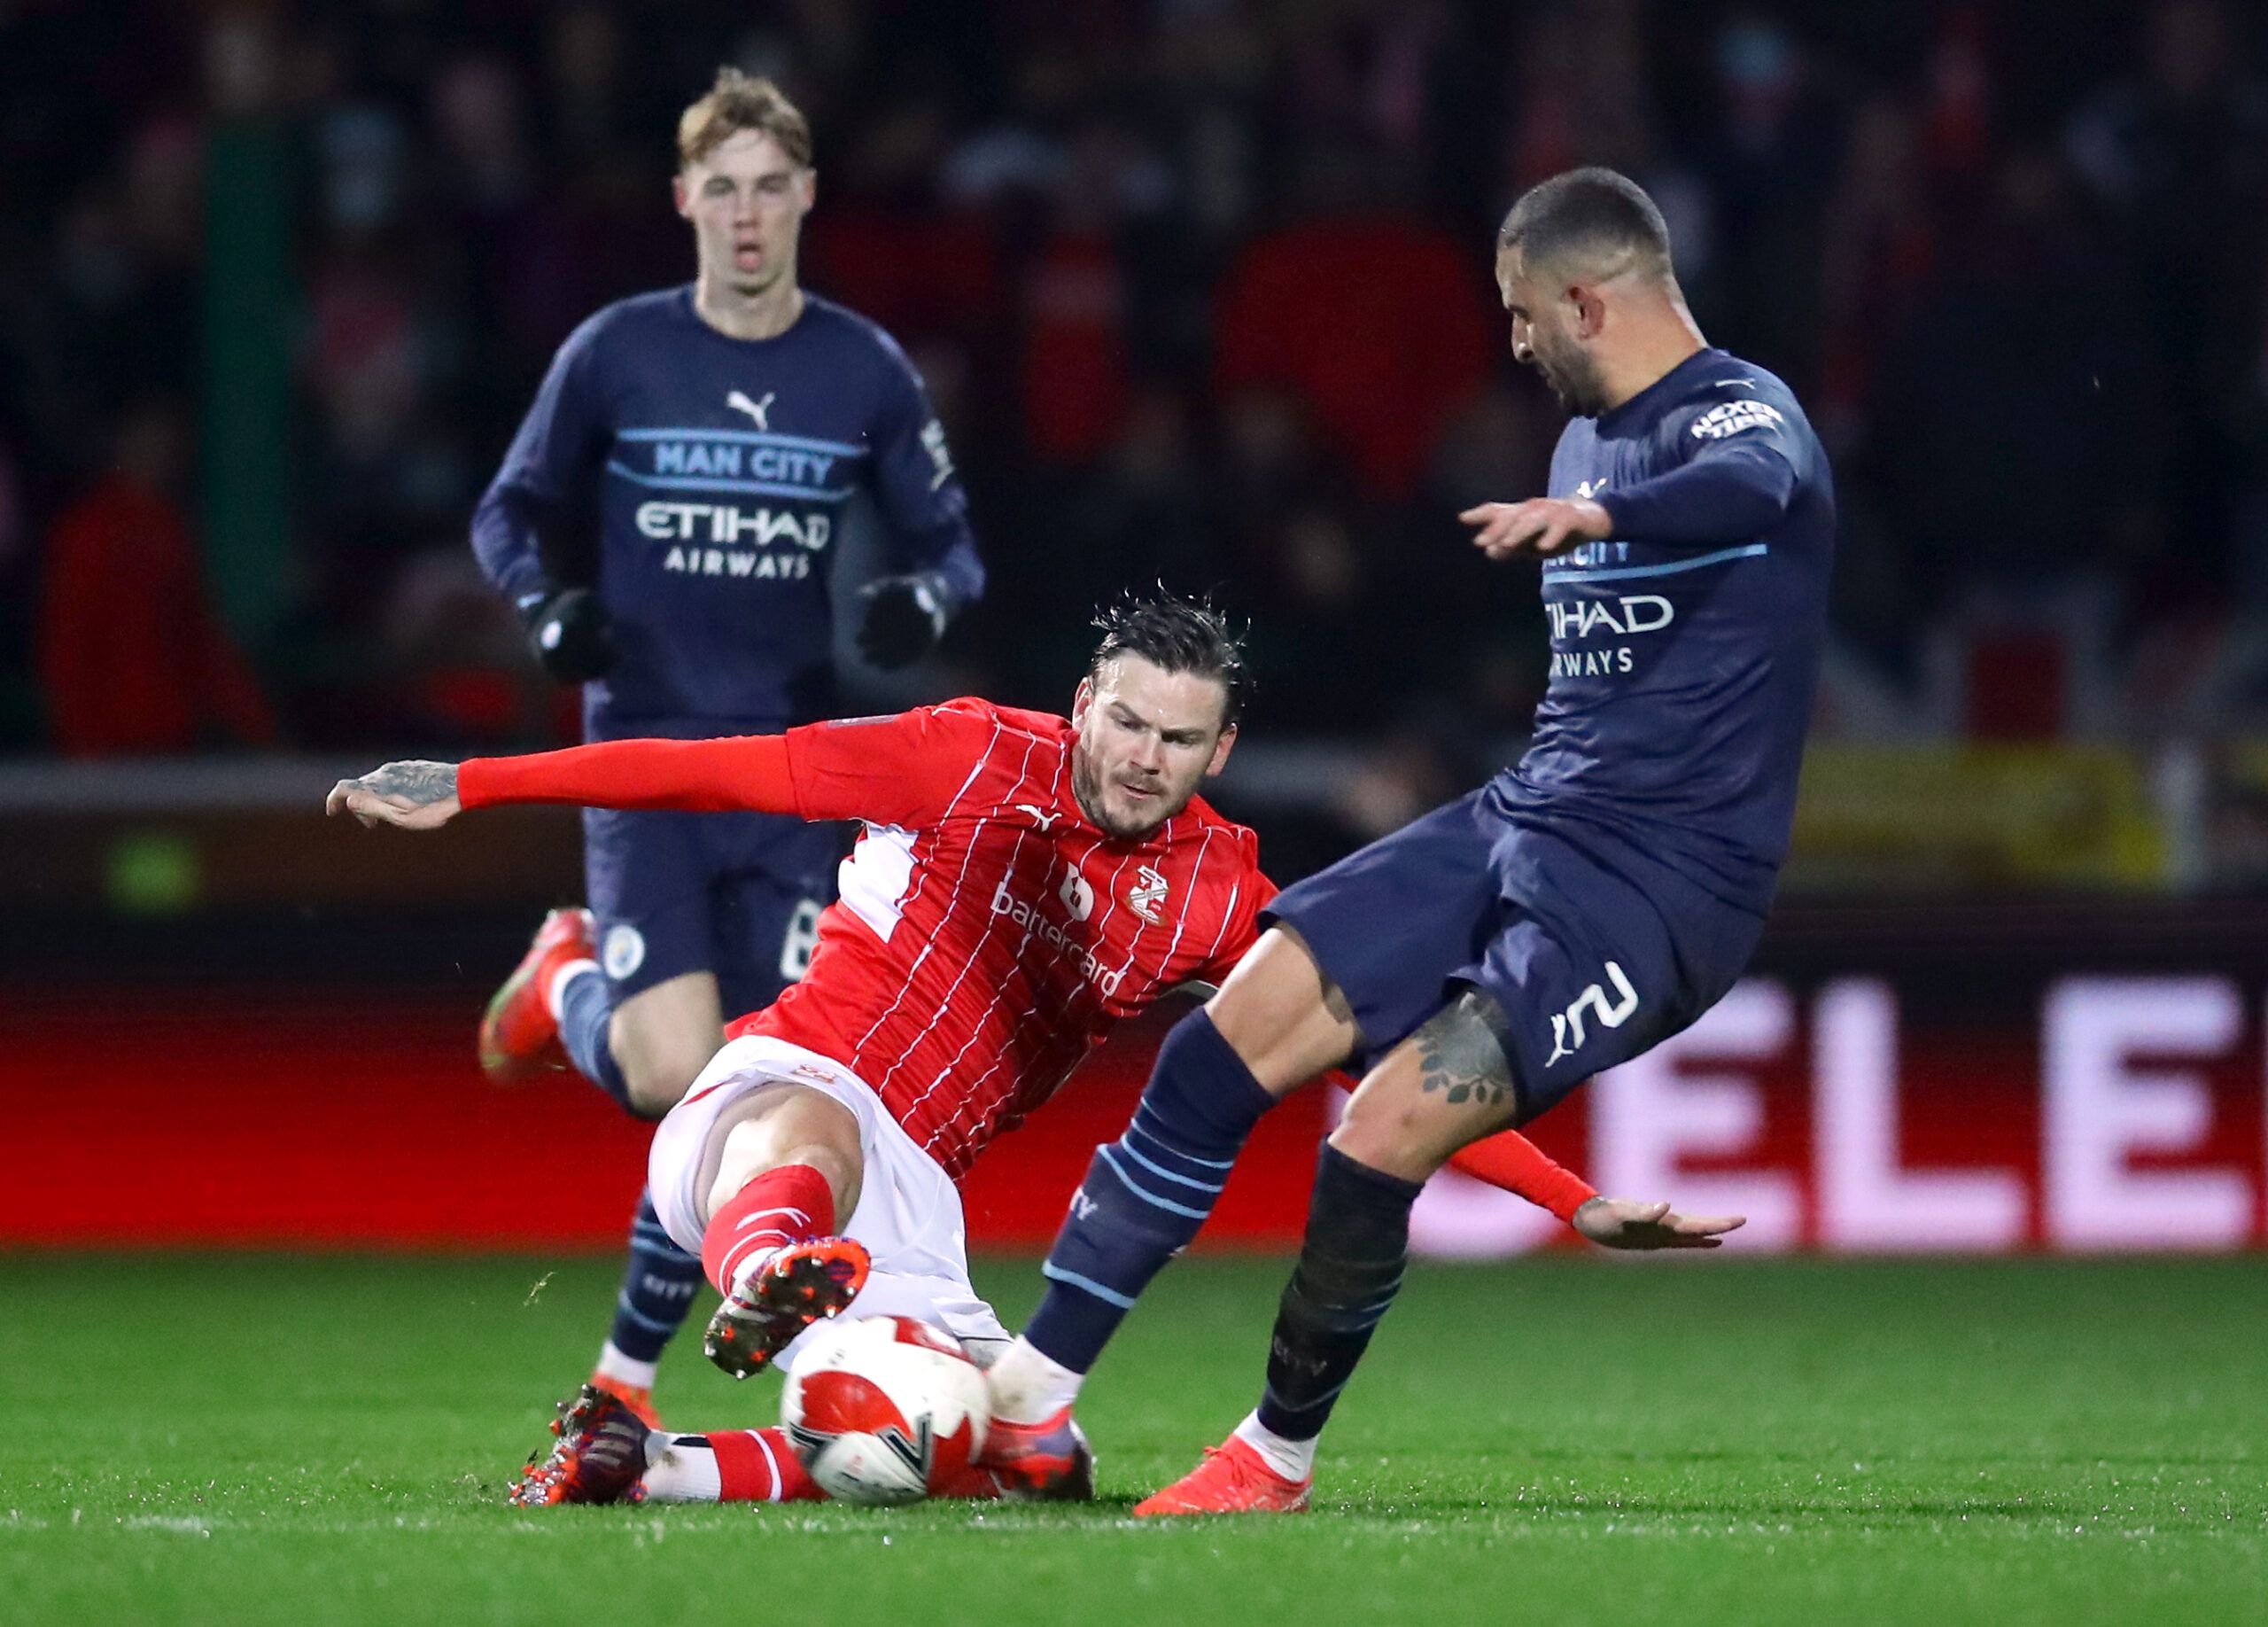 Soccer Football - FA Cup Third Round - Swindon Town v Manchester City - County Ground, Swindon, Britain - January 7, 2022 Swindon Town's Ben Gladwin  in action with Manchester City's Kyle Walker REUTERS/David Klein